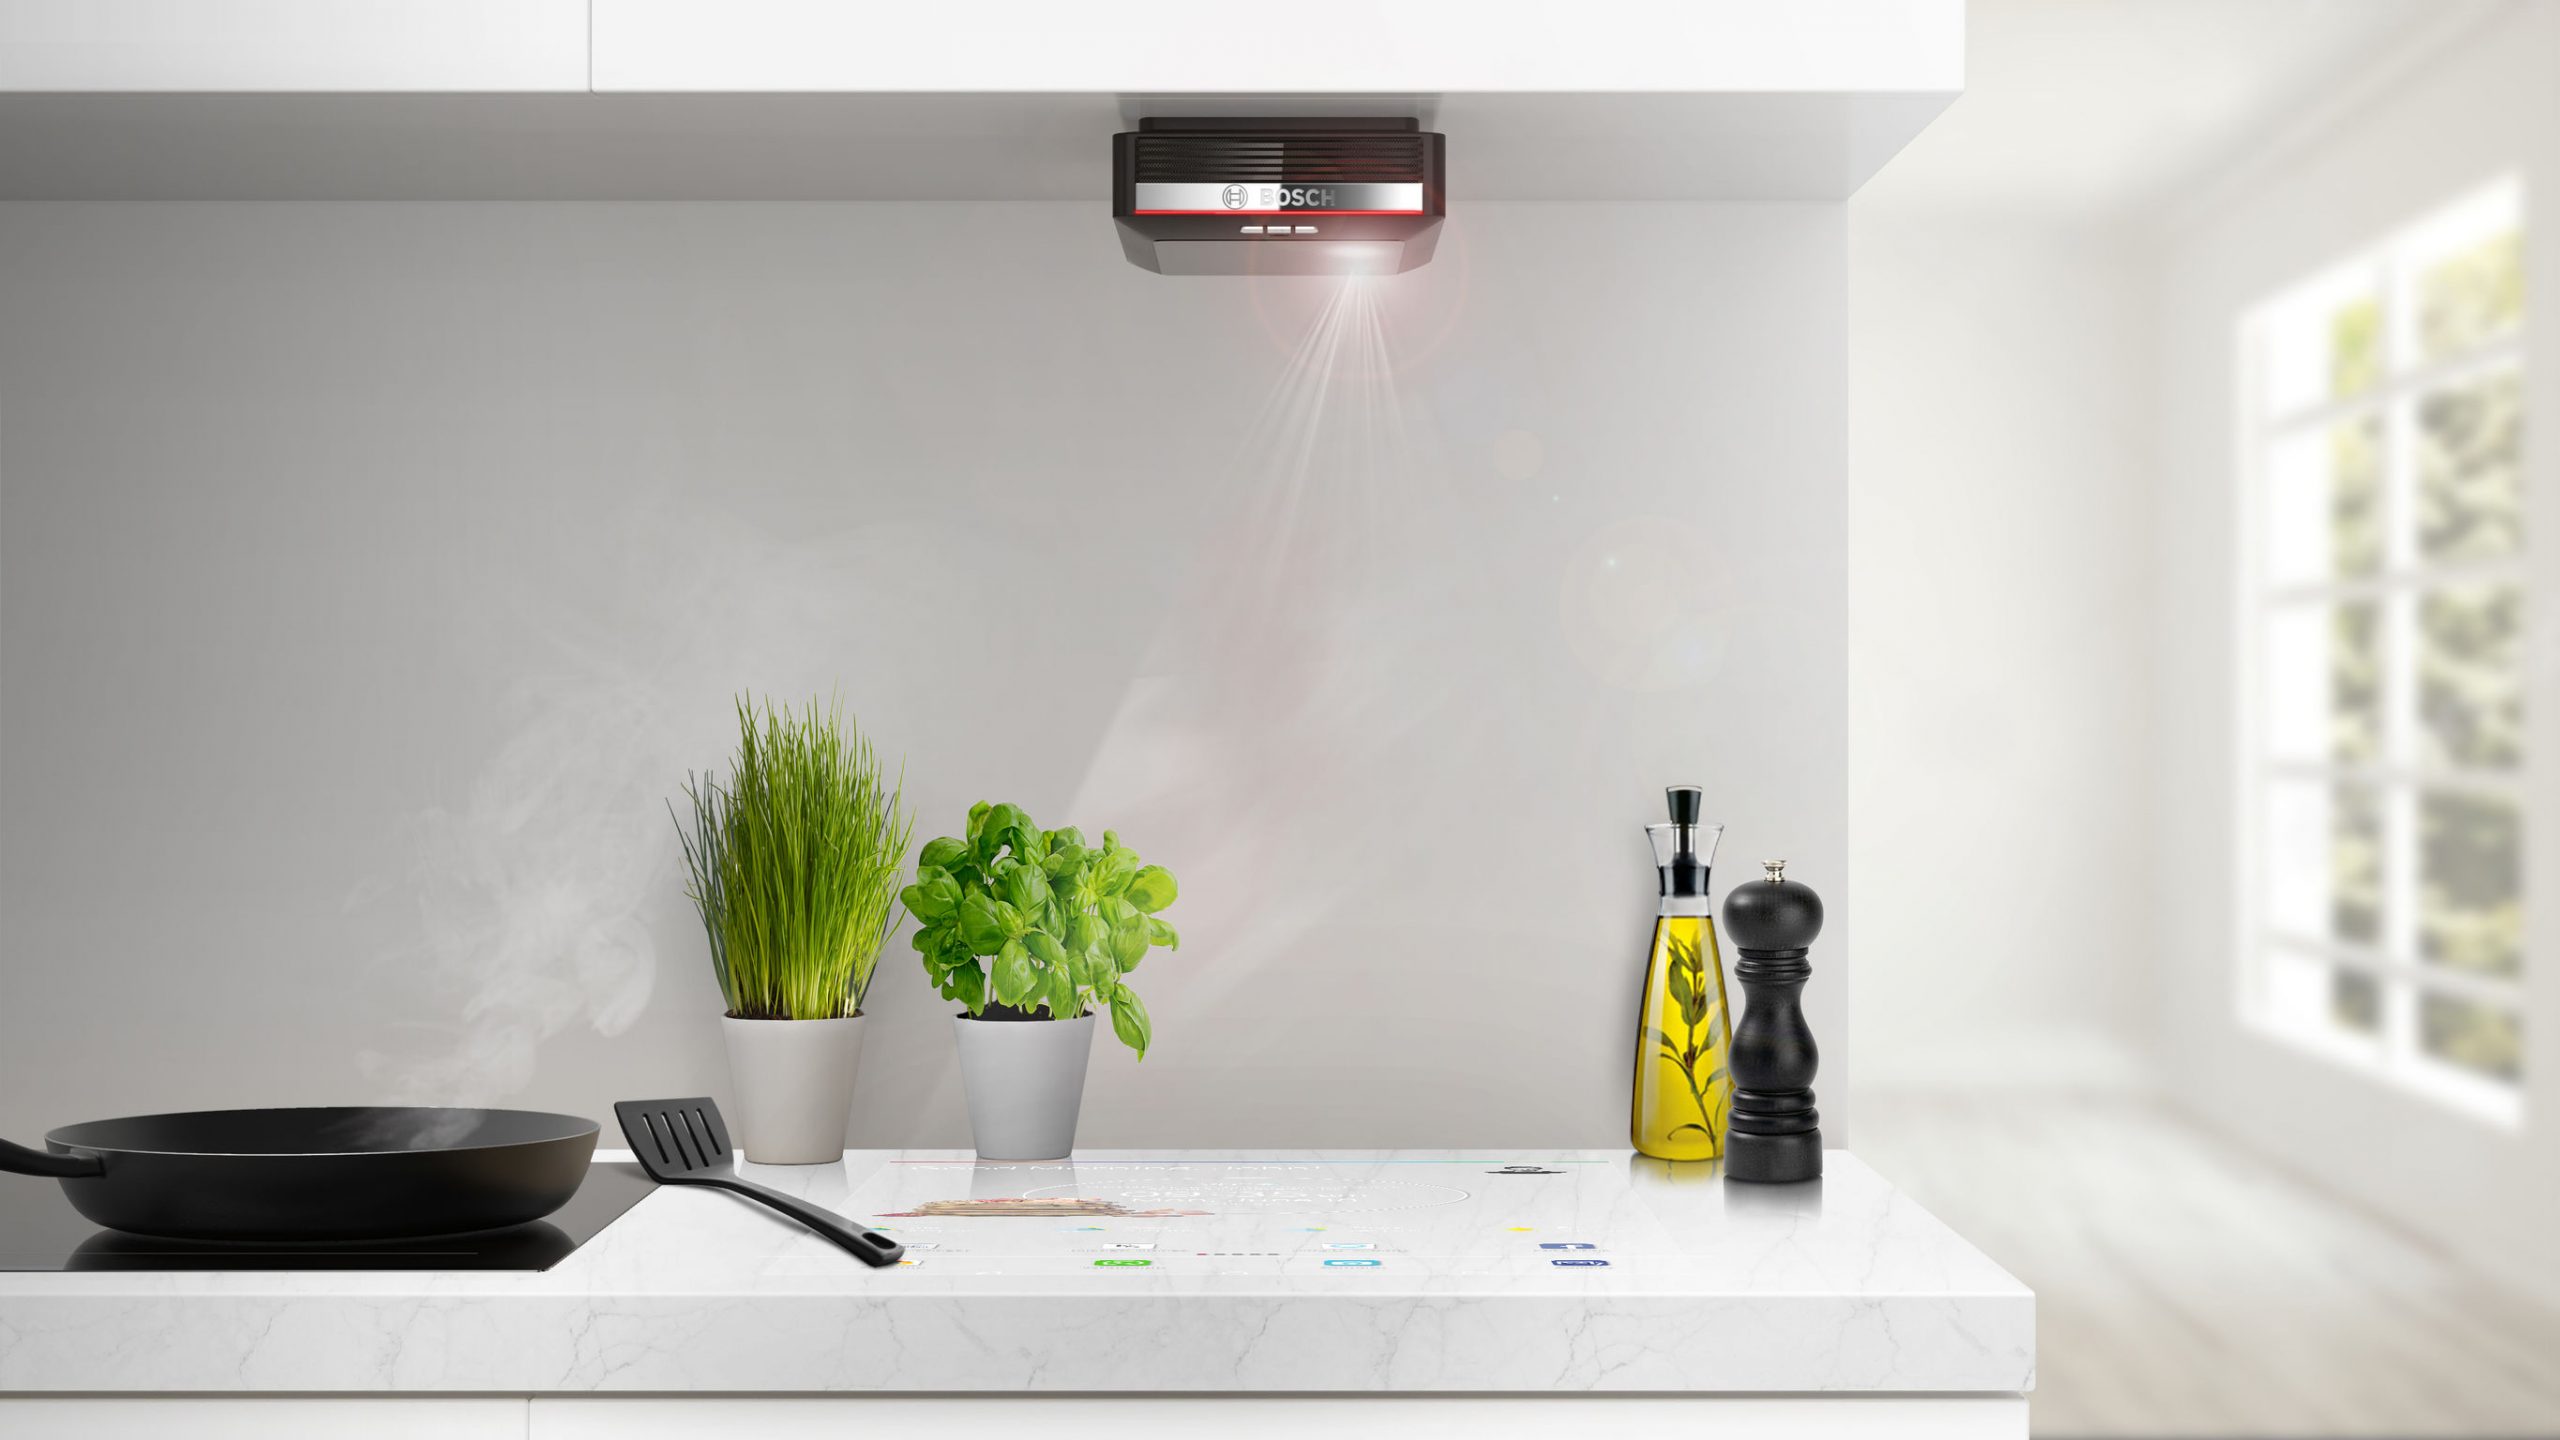 counter top projector in smart kitchen of the future